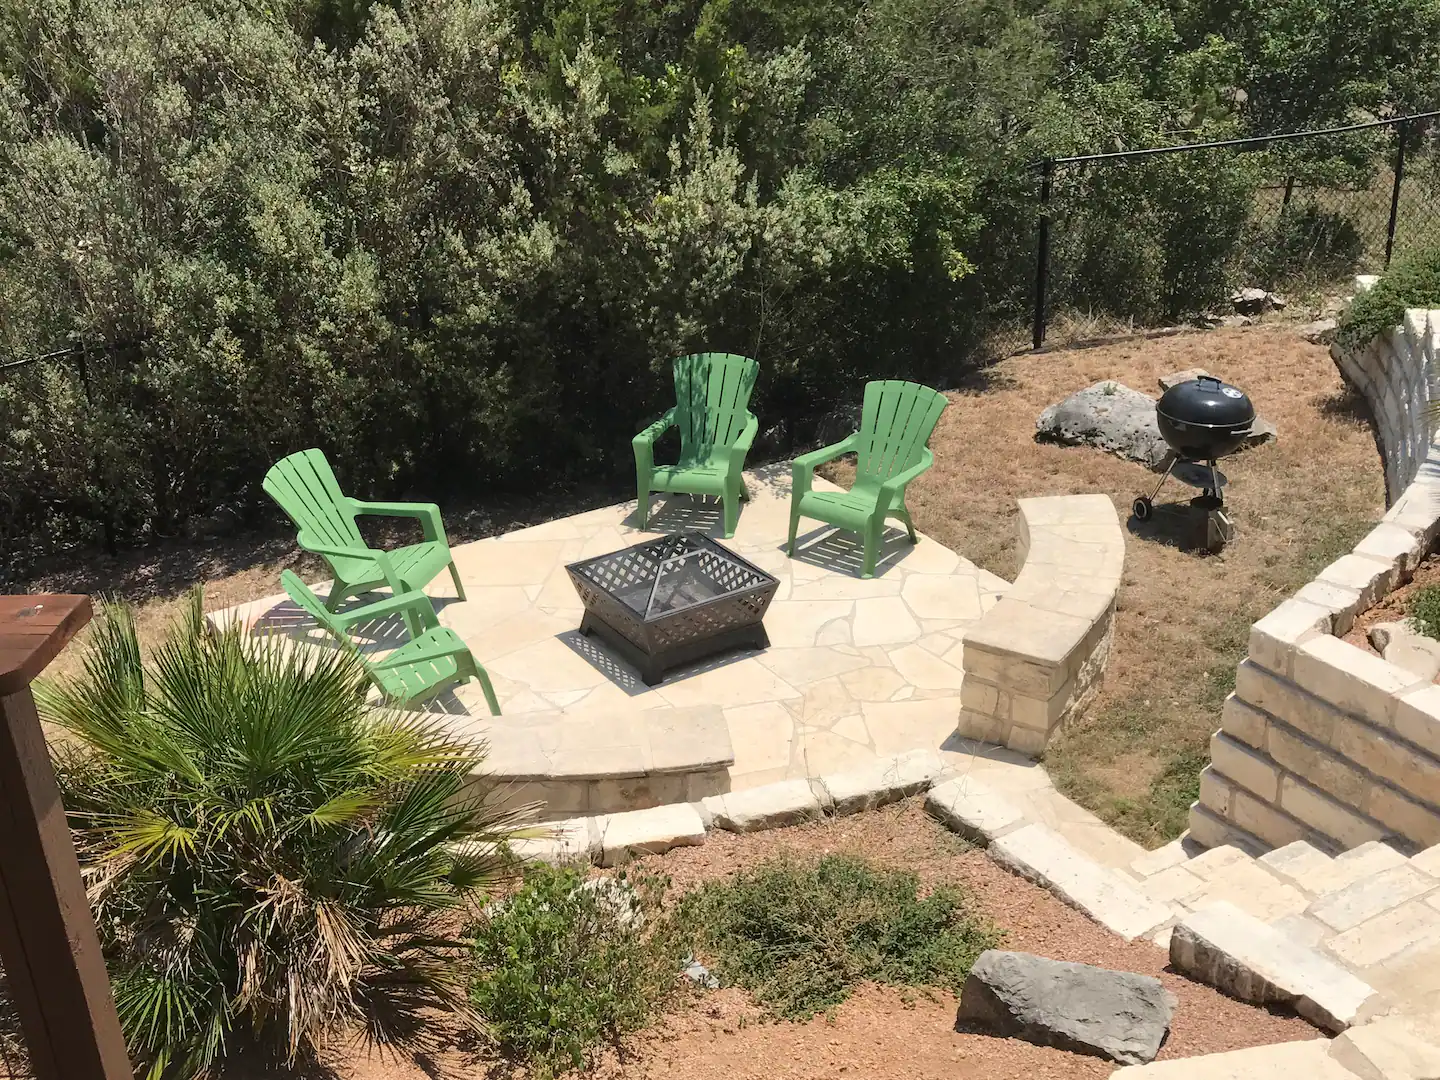 Chairs surround an outdoor fire pit